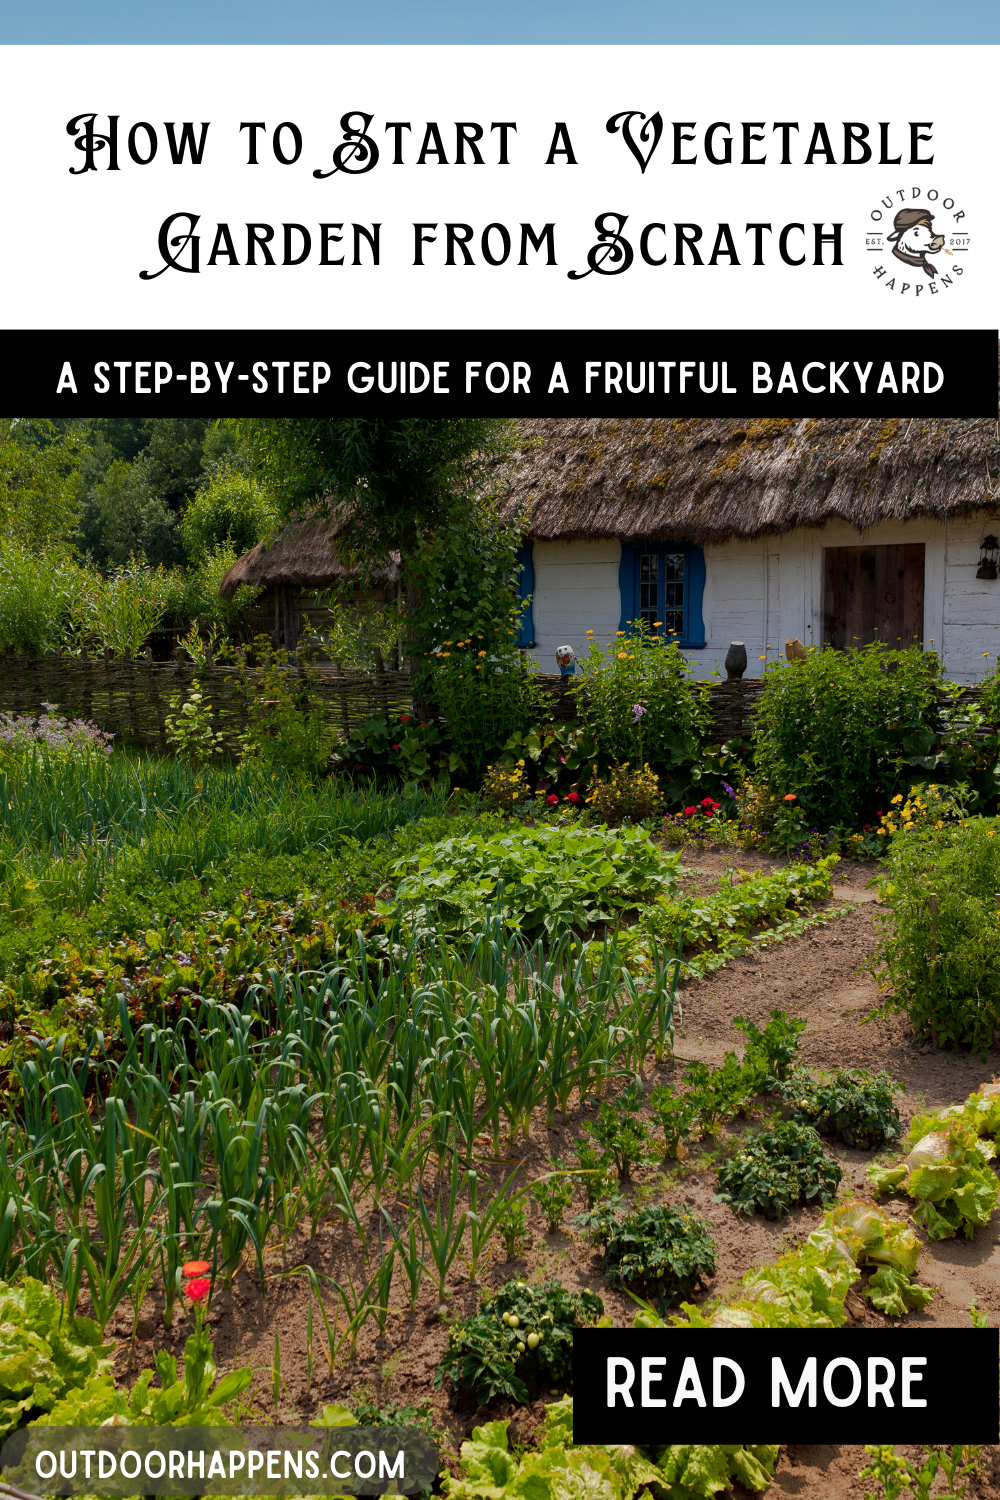 How to Start a Vegetable Garden from Scratch in Your Backyard [Step-by-Step Guide]